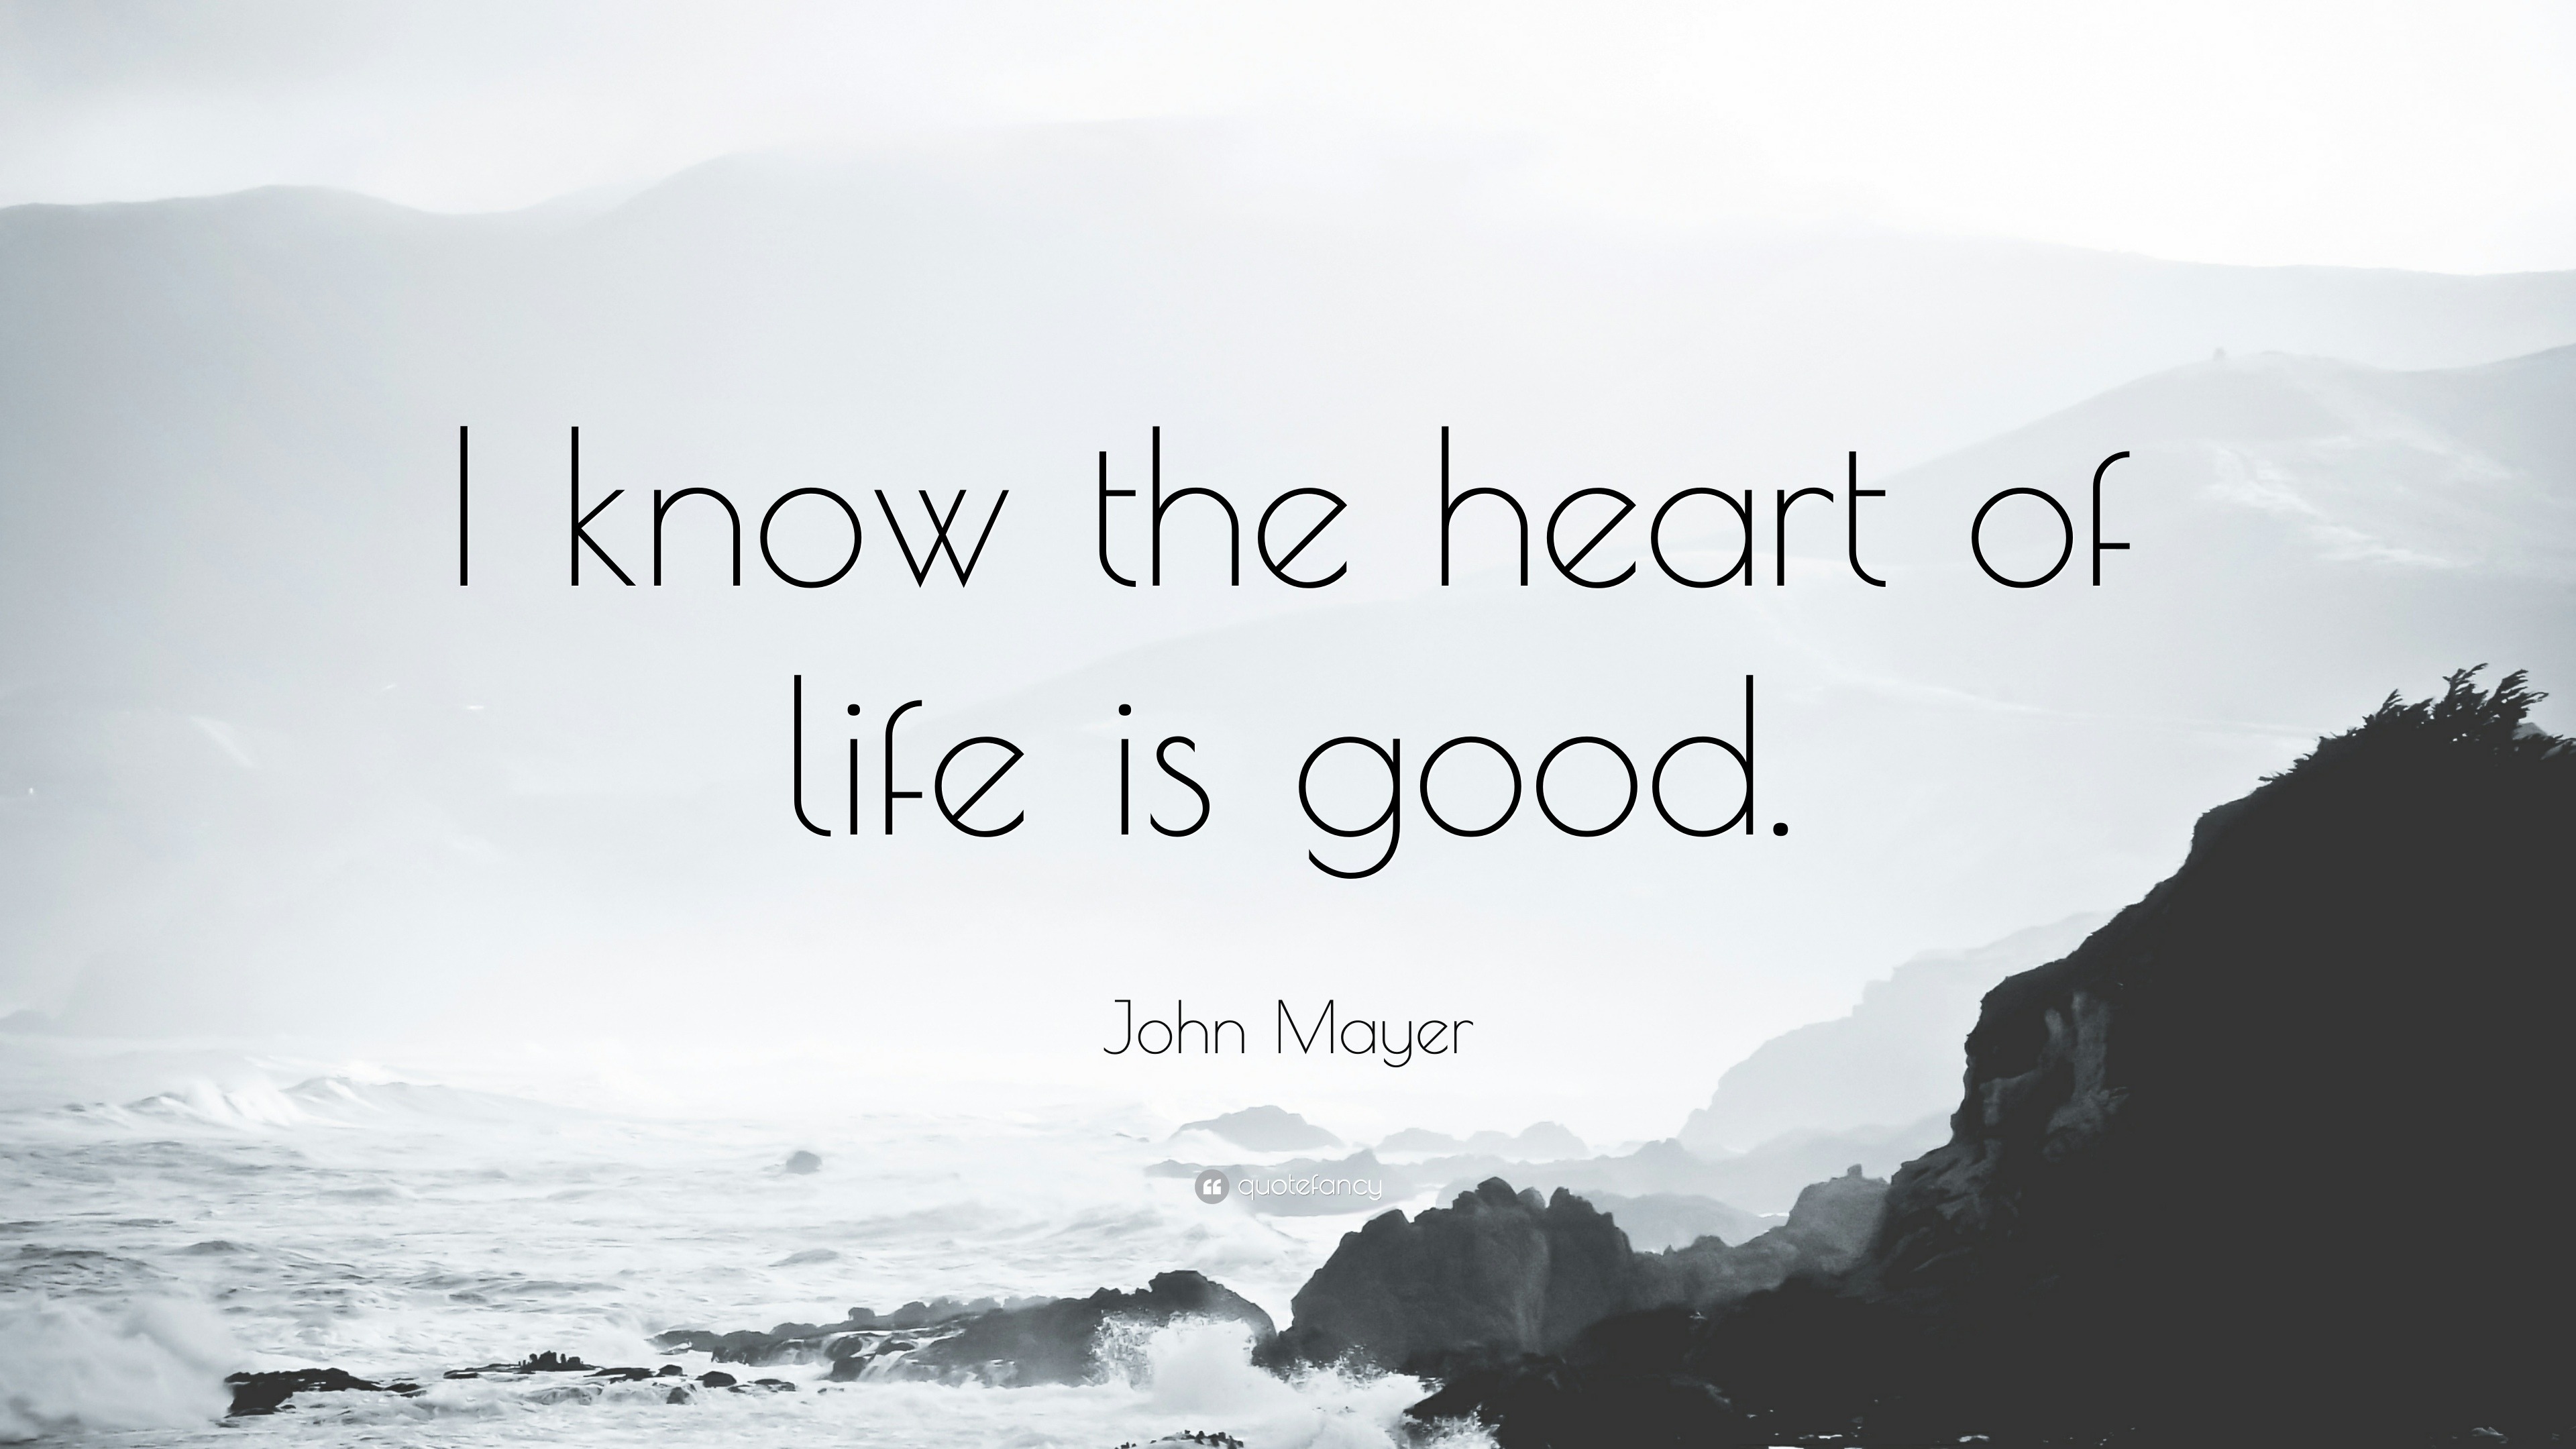 John Mayer Quote “I know the heart of life is good ”